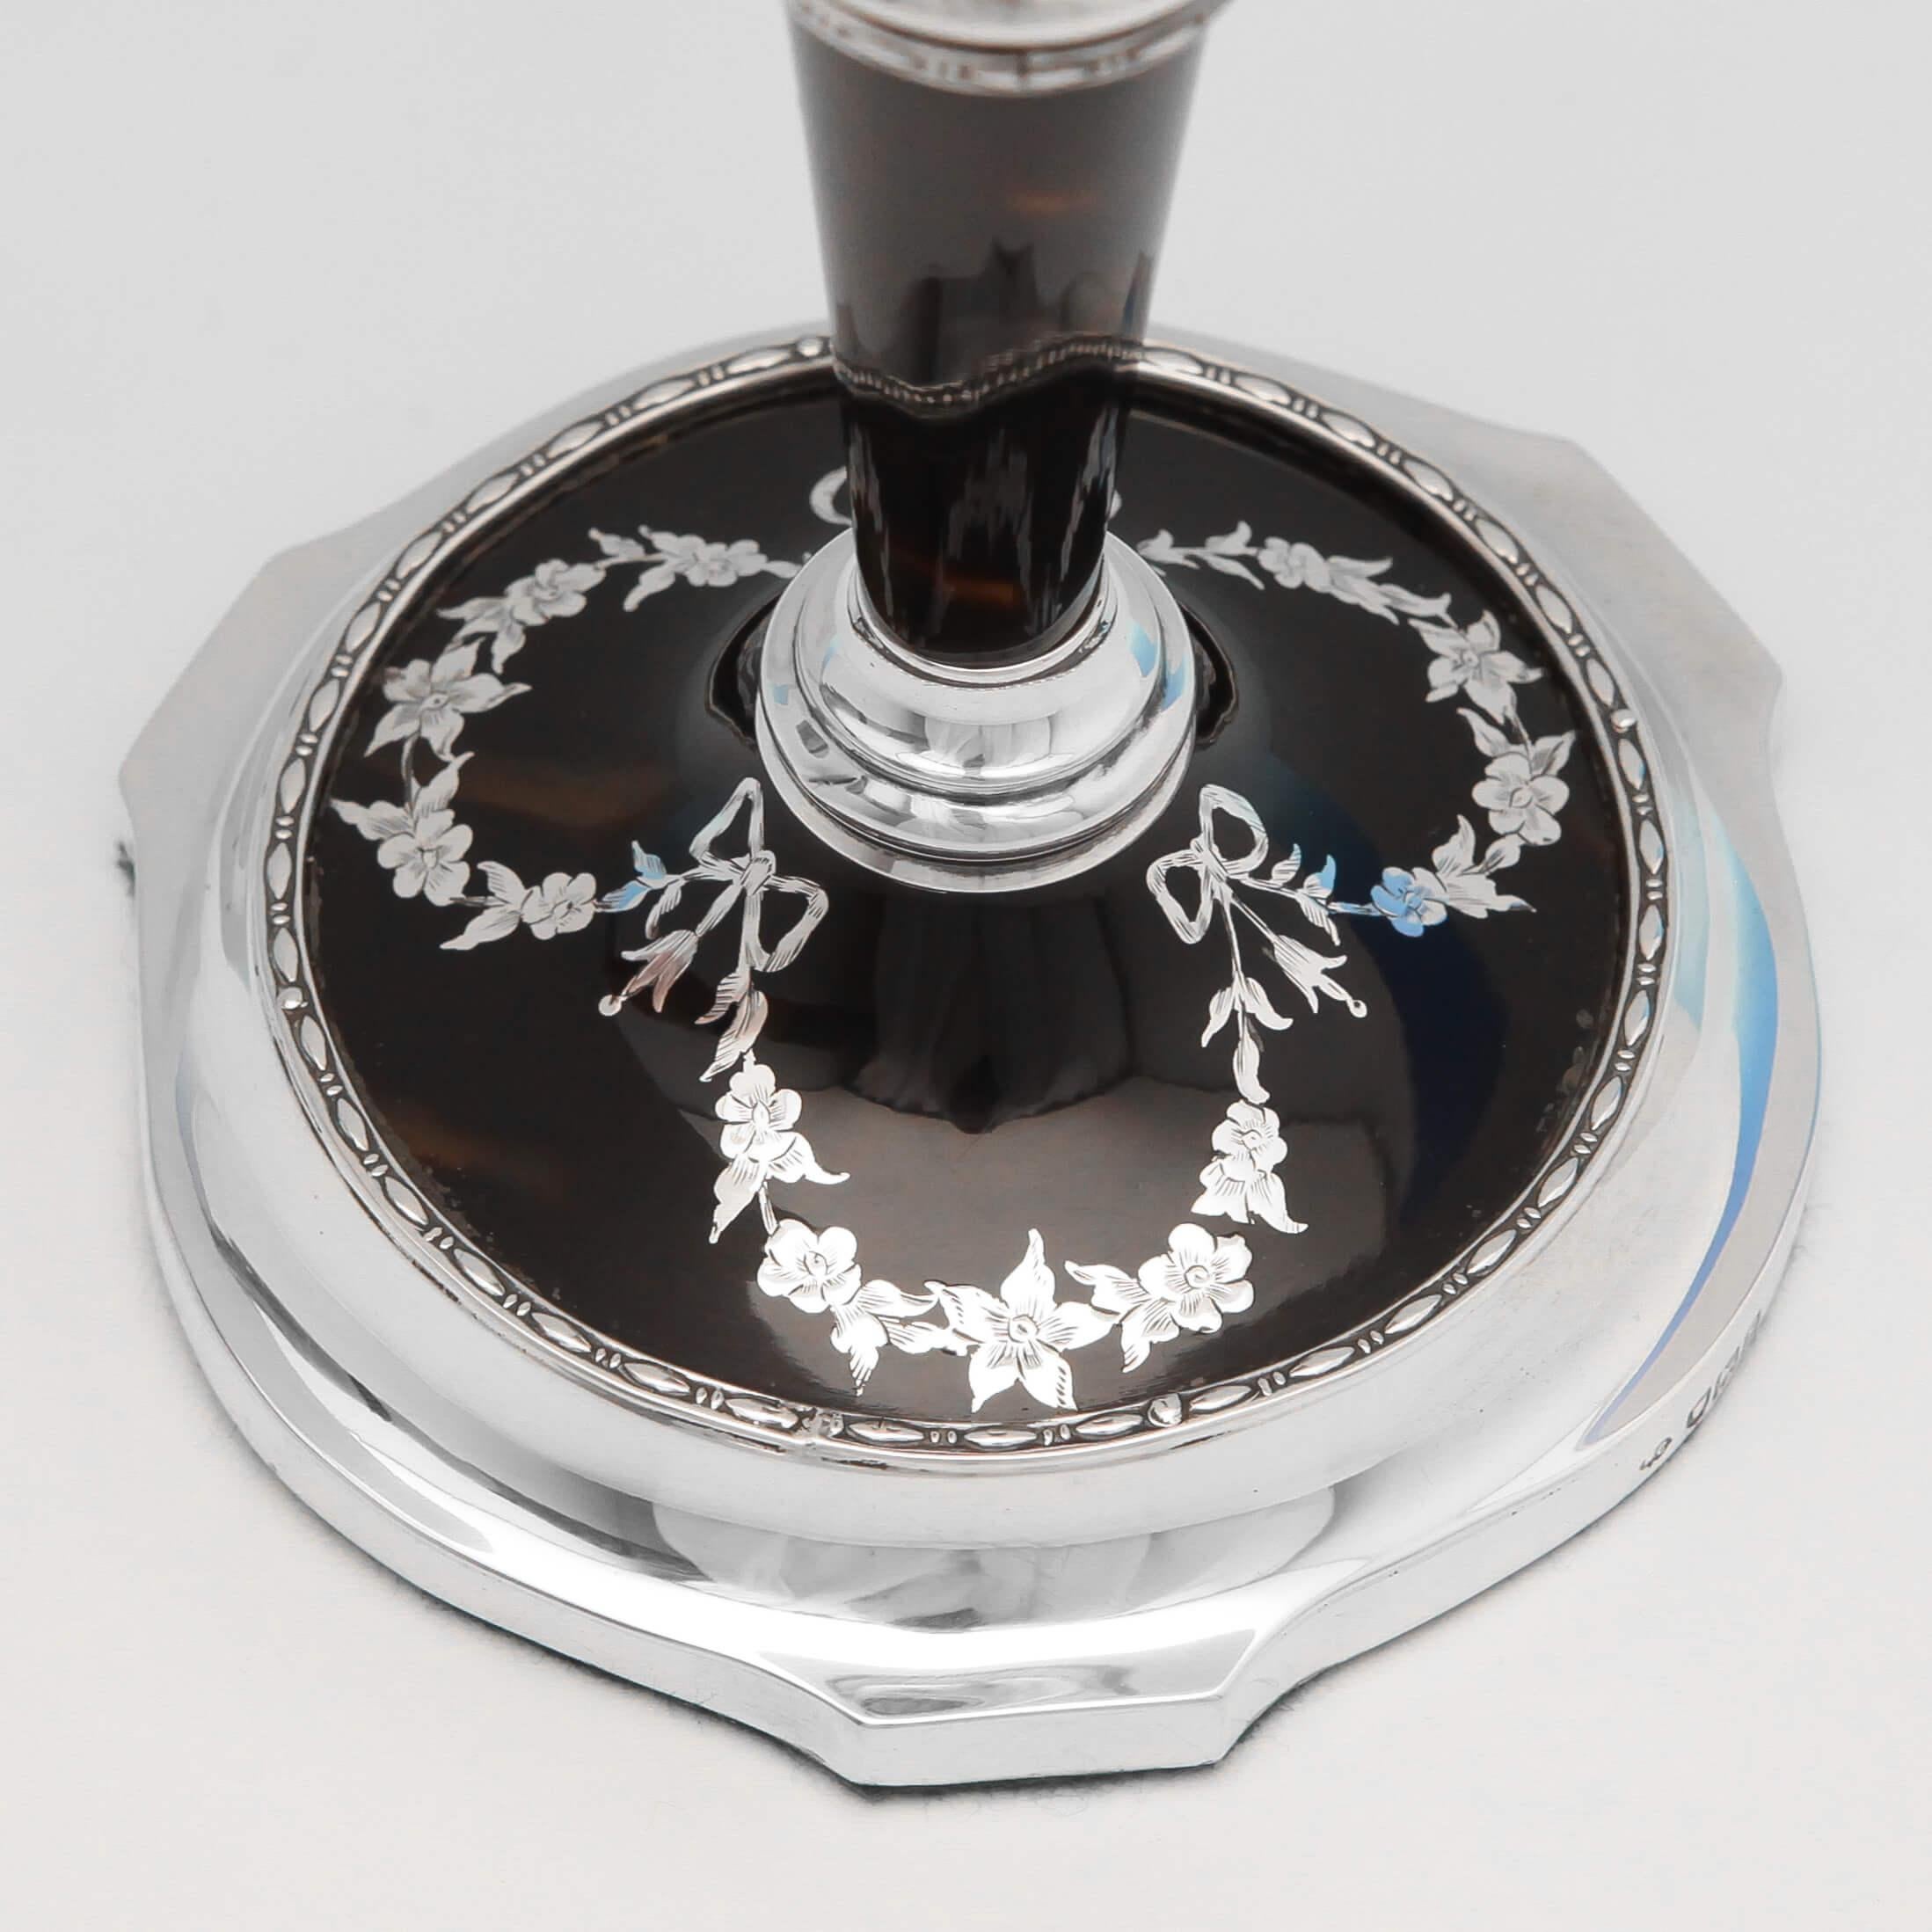 Hallmarked in London in 1913 by William Comyns, this attractive pair of sterling silver candlesticks, feature tapered tortoiseshell columns and tortoiseshell bases with inlaid silver bows and garlands. Each candlestick measures 7